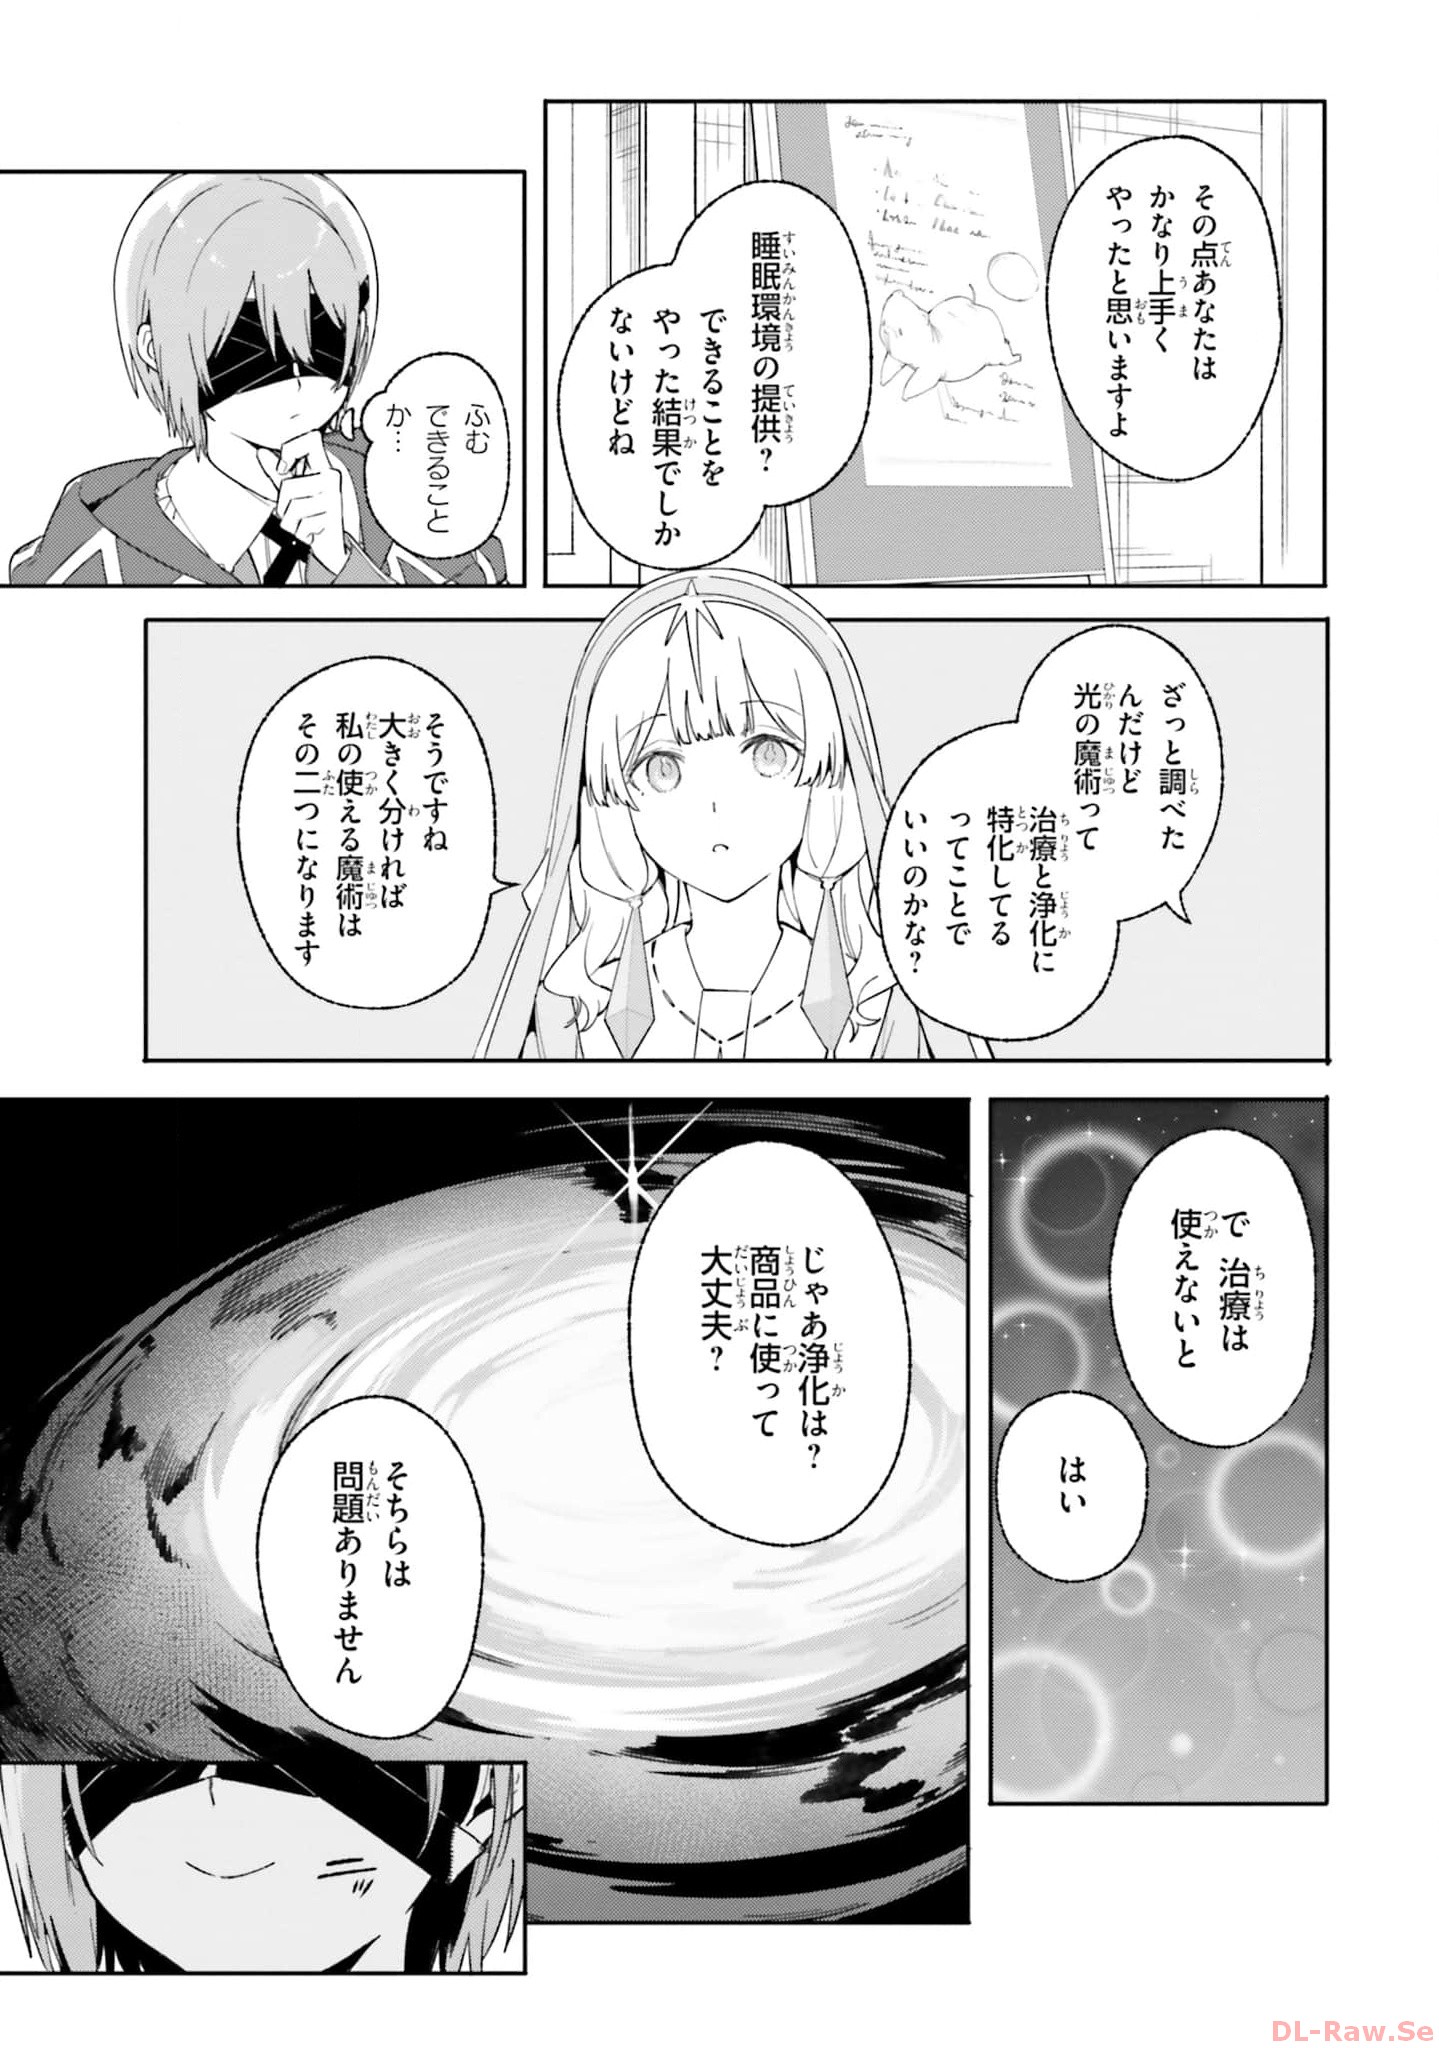 Kunon the Sorcerer Can See Kunon the Sorcerer Can See Through 魔術師クノンは見えている 第19話 - Page 15